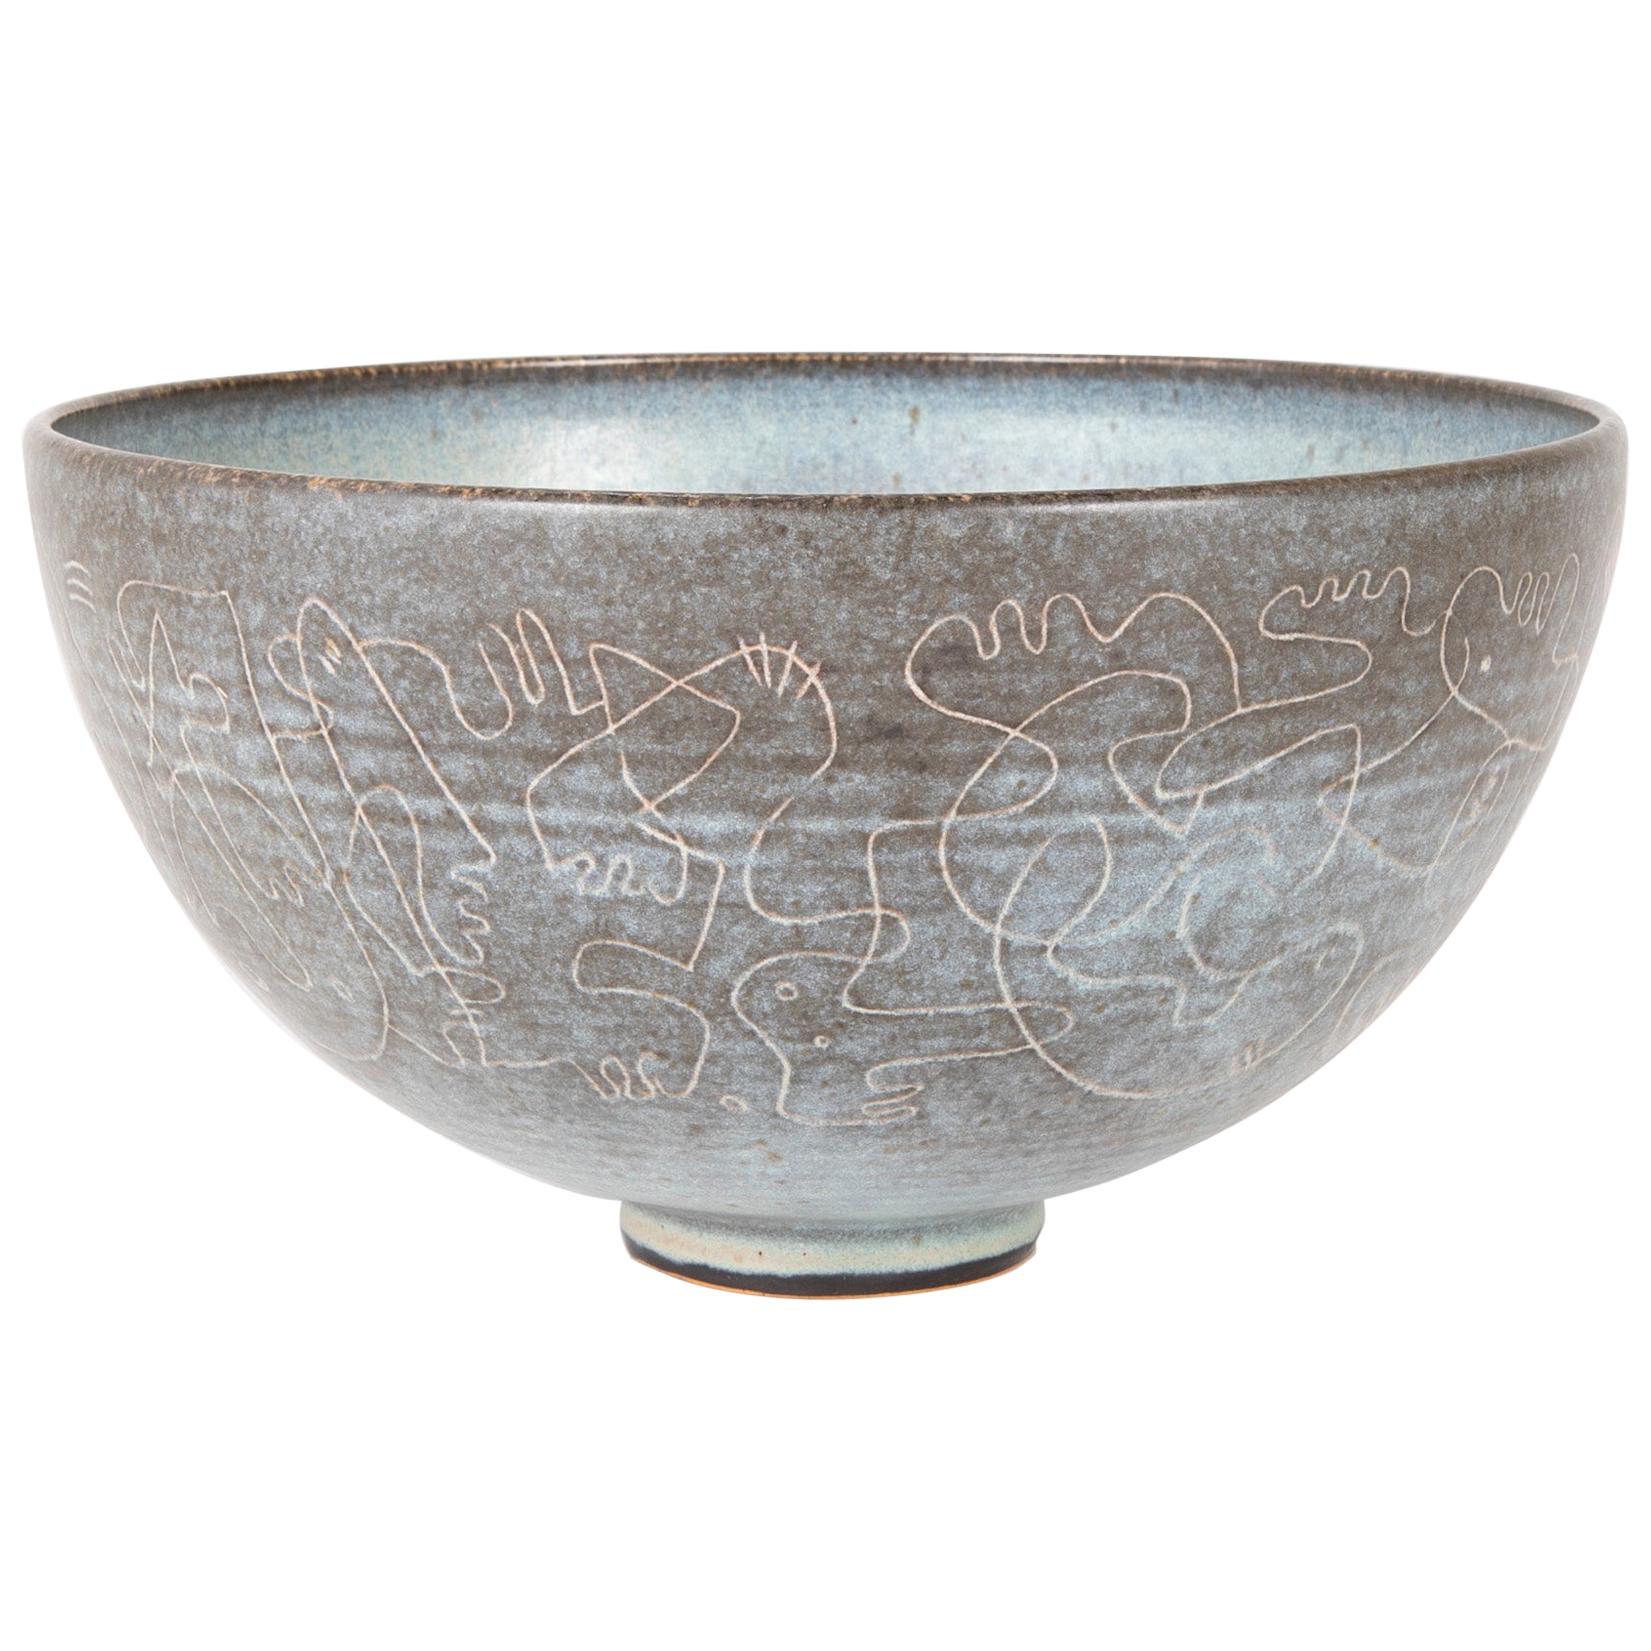 Stoneware Bowl Designed by Edwin and Mary Scheier